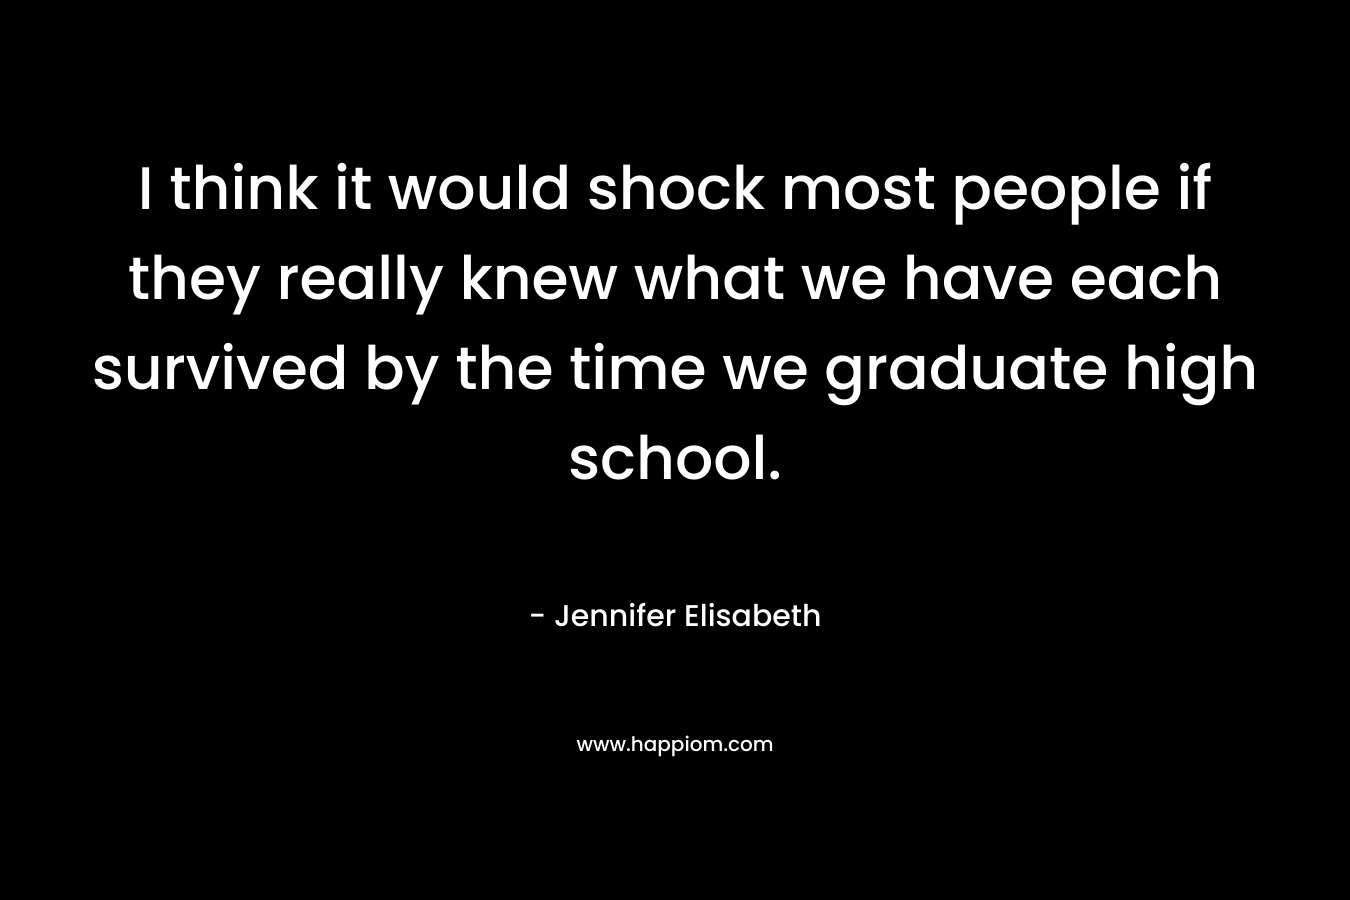 I think it would shock most people if they really knew what we have each survived by the time we graduate high school. – Jennifer Elisabeth